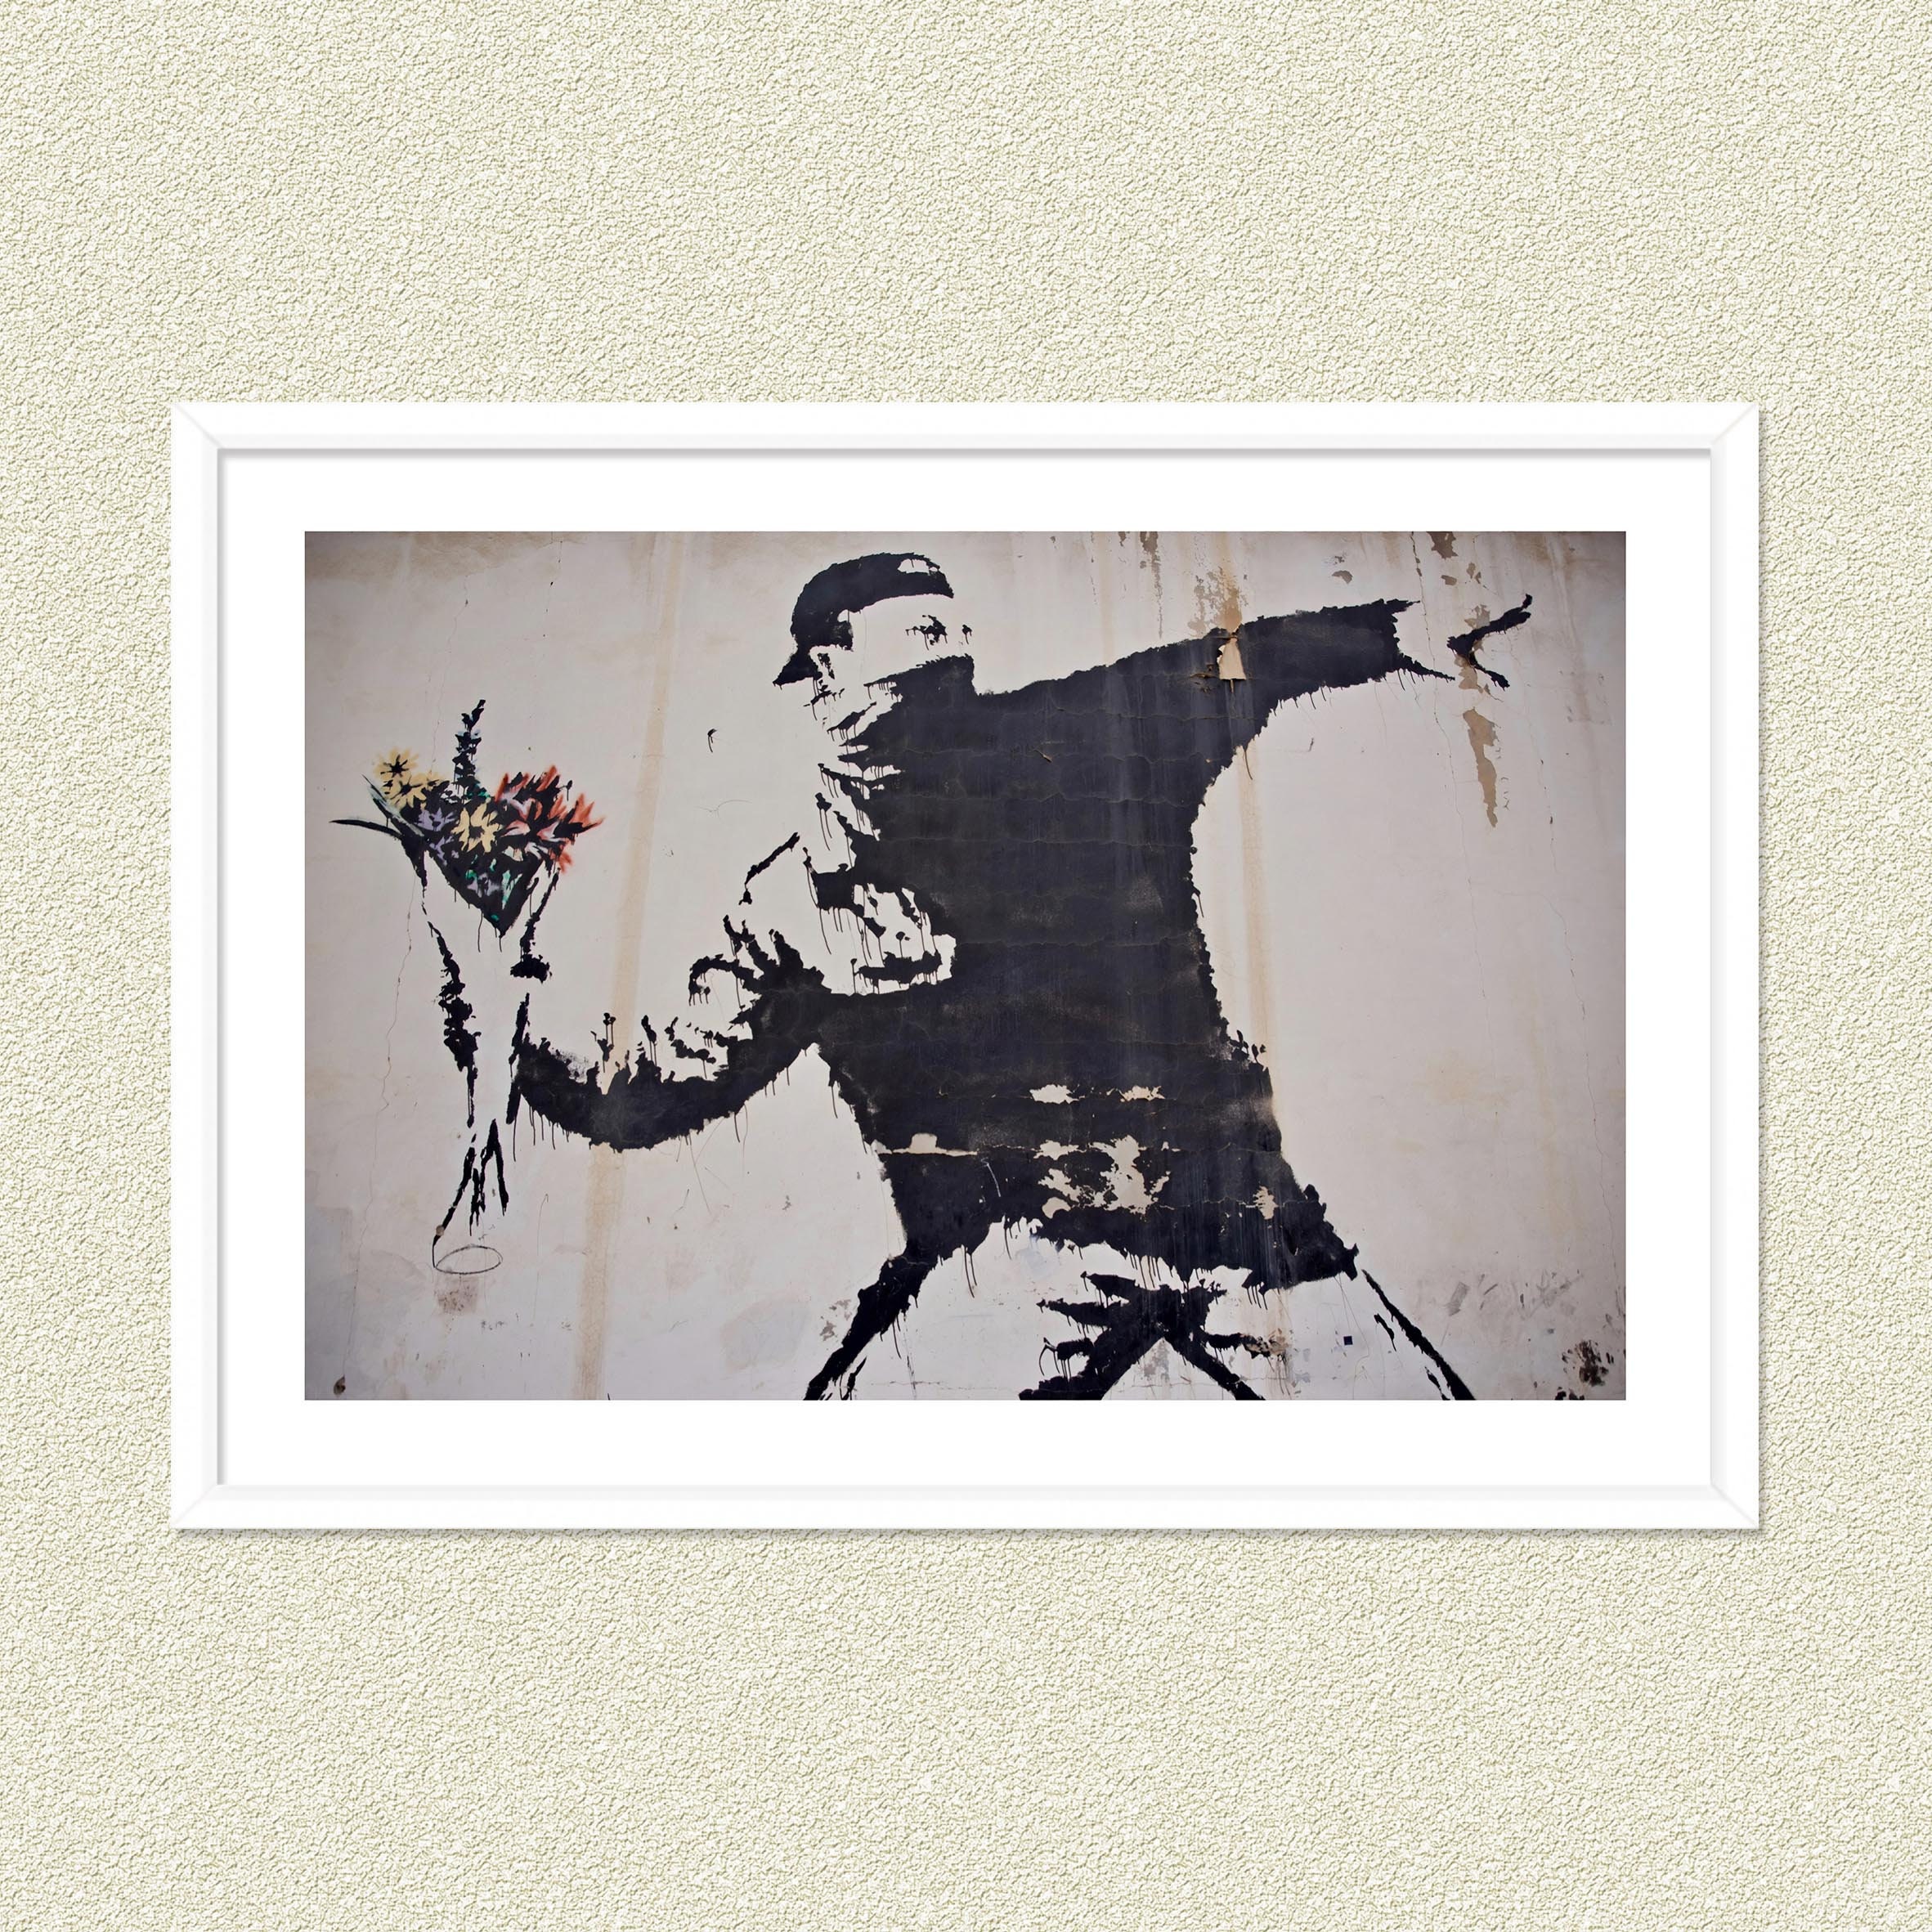 Poster affiche BANKSY LOVE IS ANSWER WALL STREET ART - A4 (21x29,7cm)